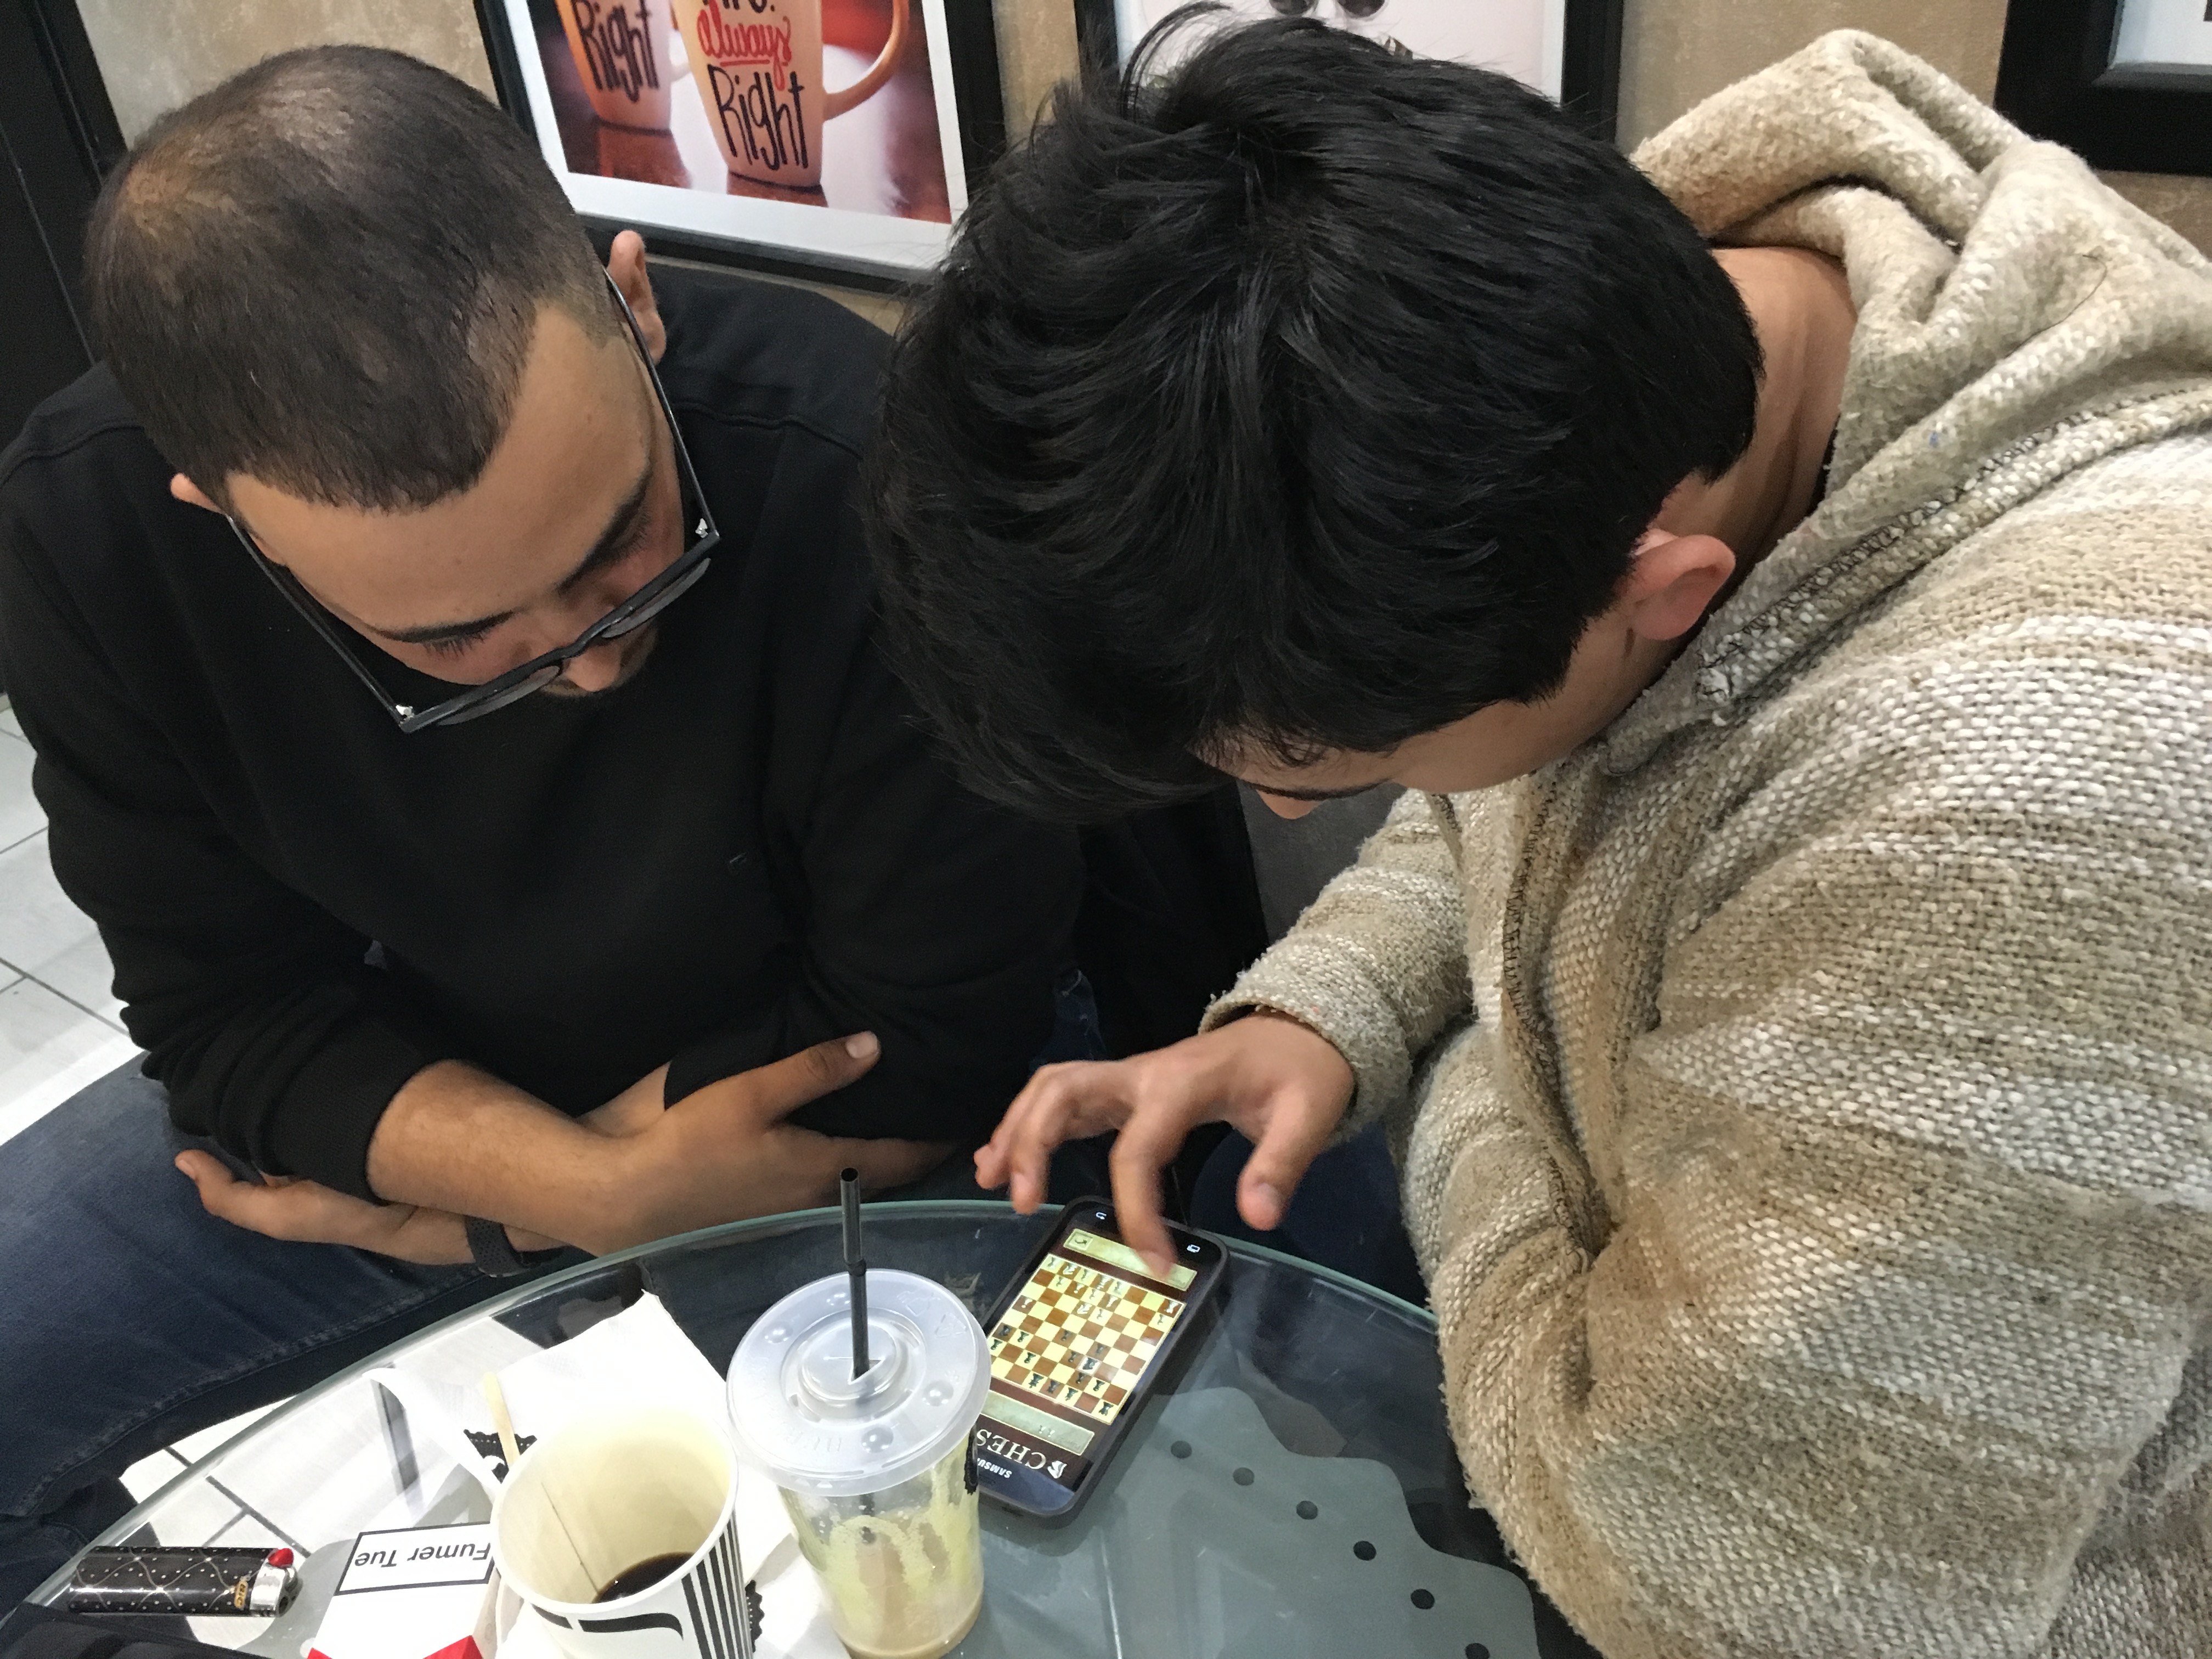 men playing chess on smartphones over coffee